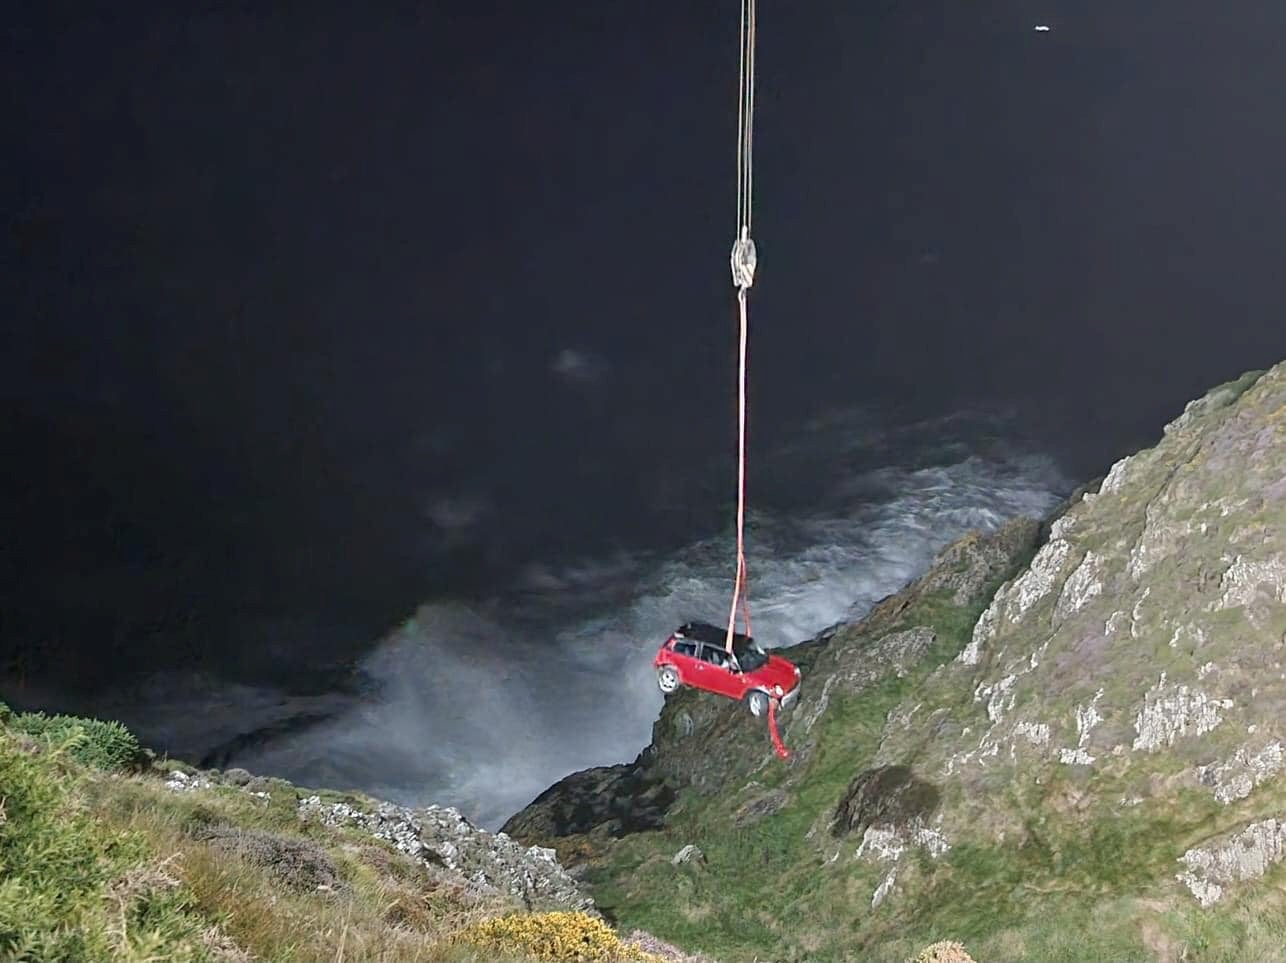 The red mini was retrieved after the near-death plunge